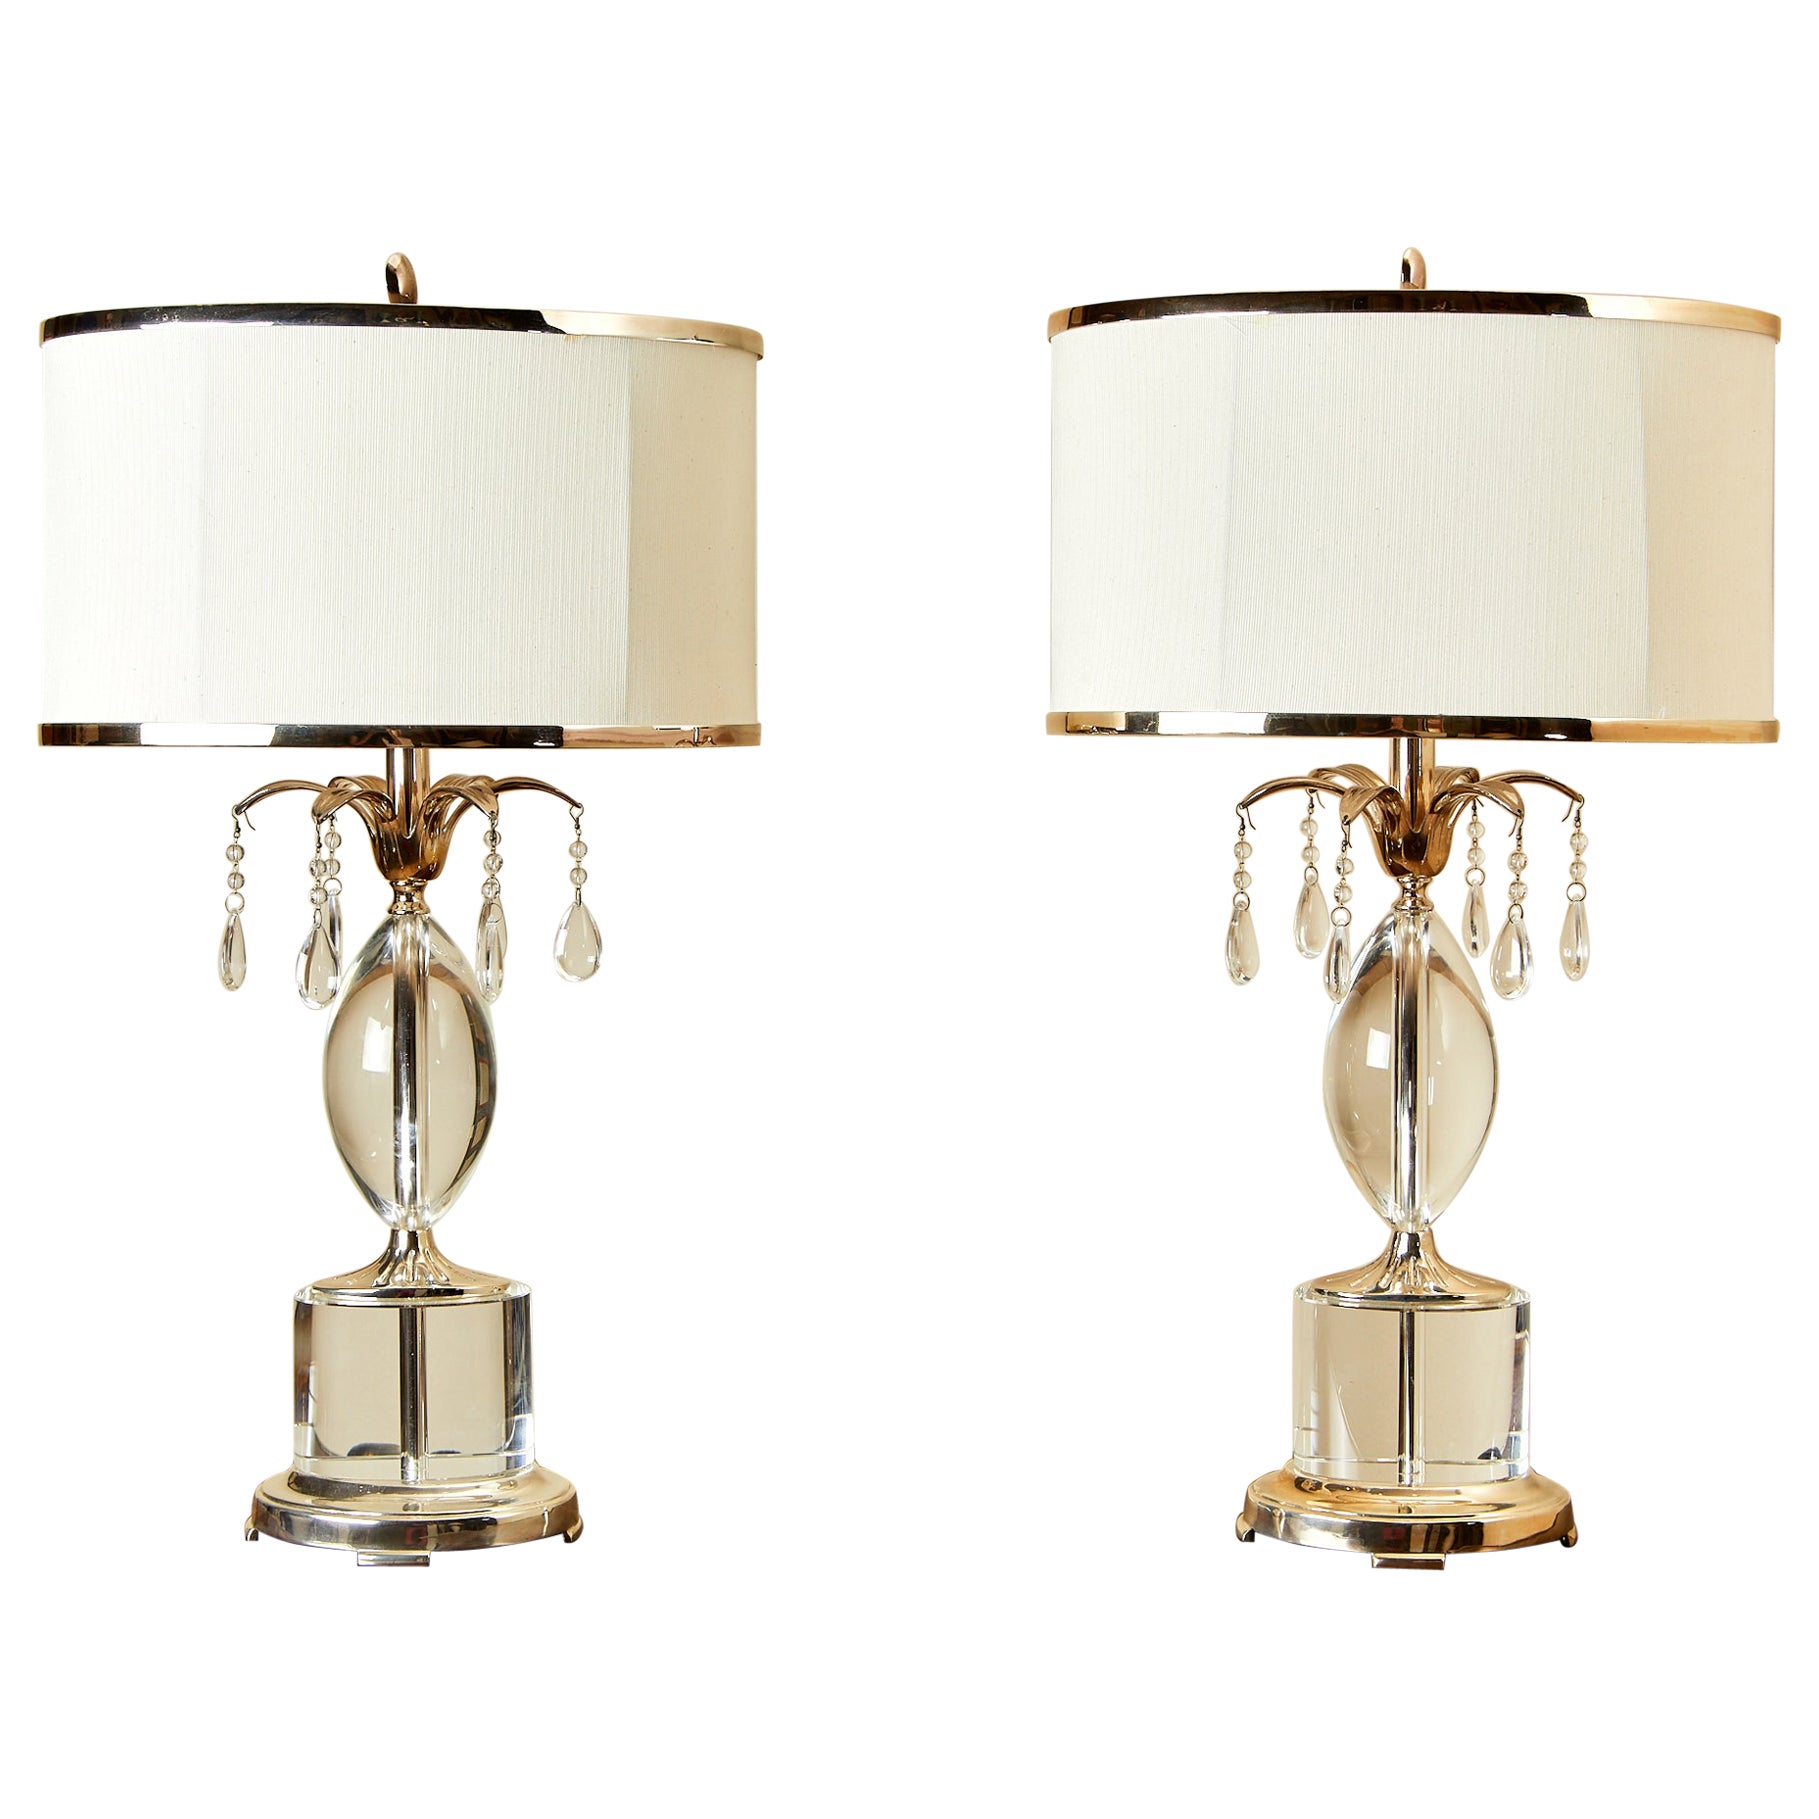 John Richard, pair of lamps with altuglass and silvered brass pendants.